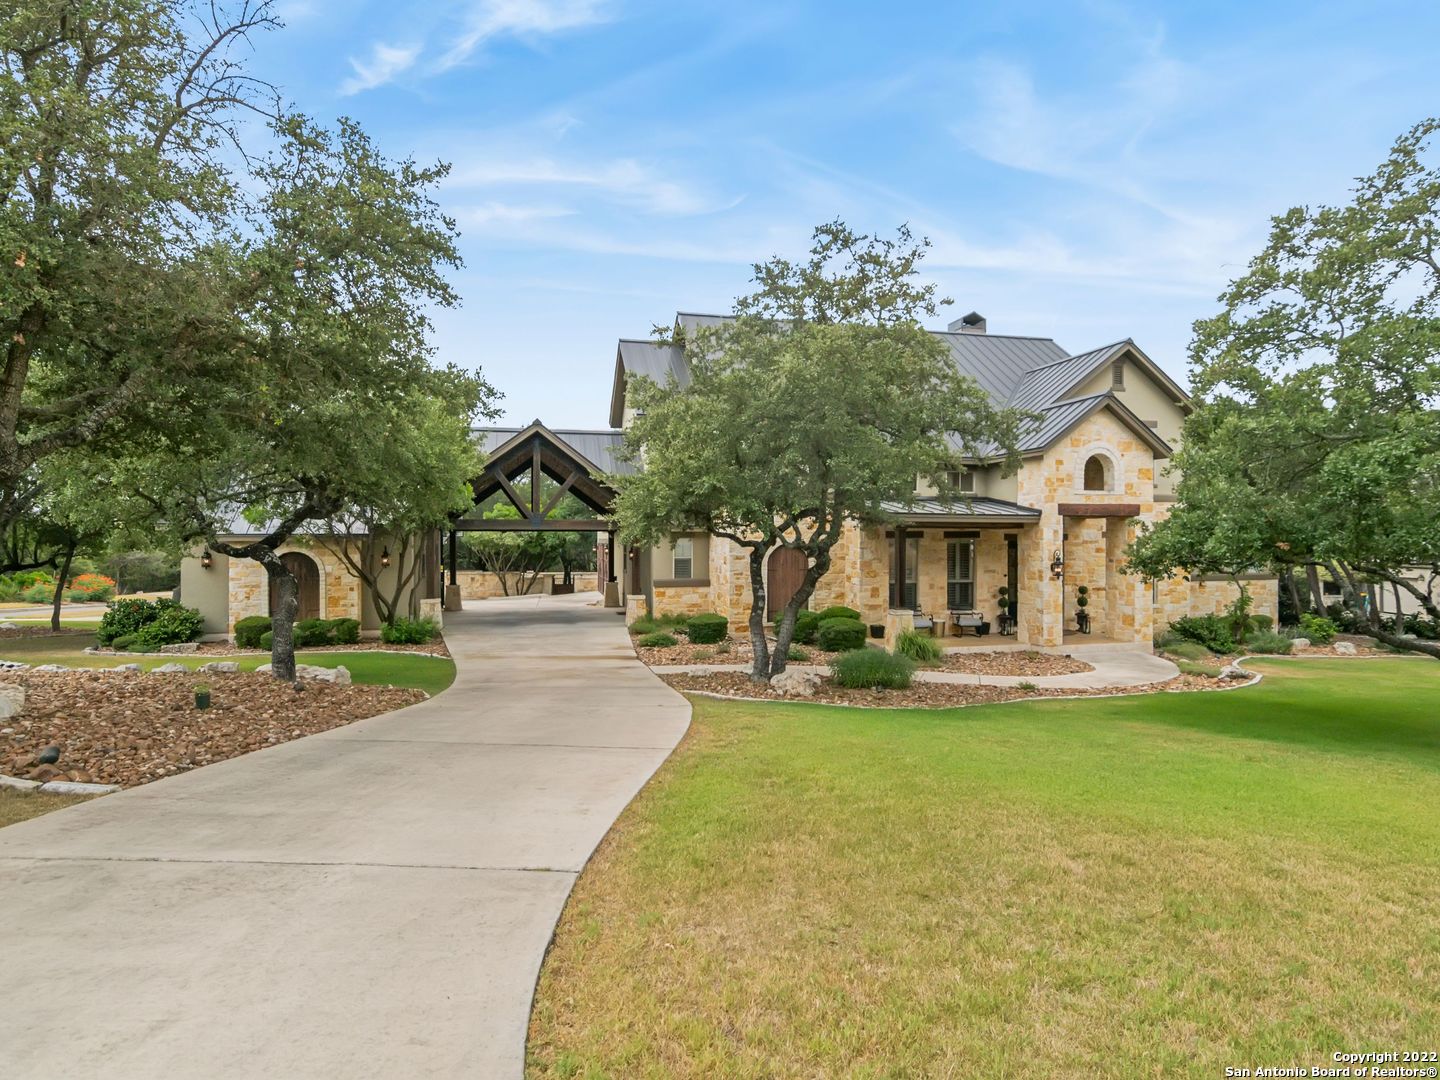 Come check out this gorgeous custom home on a corner lot in Menger Springs! Top of the line updated finishes throughout with a beautiful master suite, office, movie room, large living spaces and a bonus room.   The backyard offers plenty with covered outdoor living space, large pool with hot tub, putting green and dog run. Sits on over an acre with mature landscaping in upscale neighborhood right in Boerne!